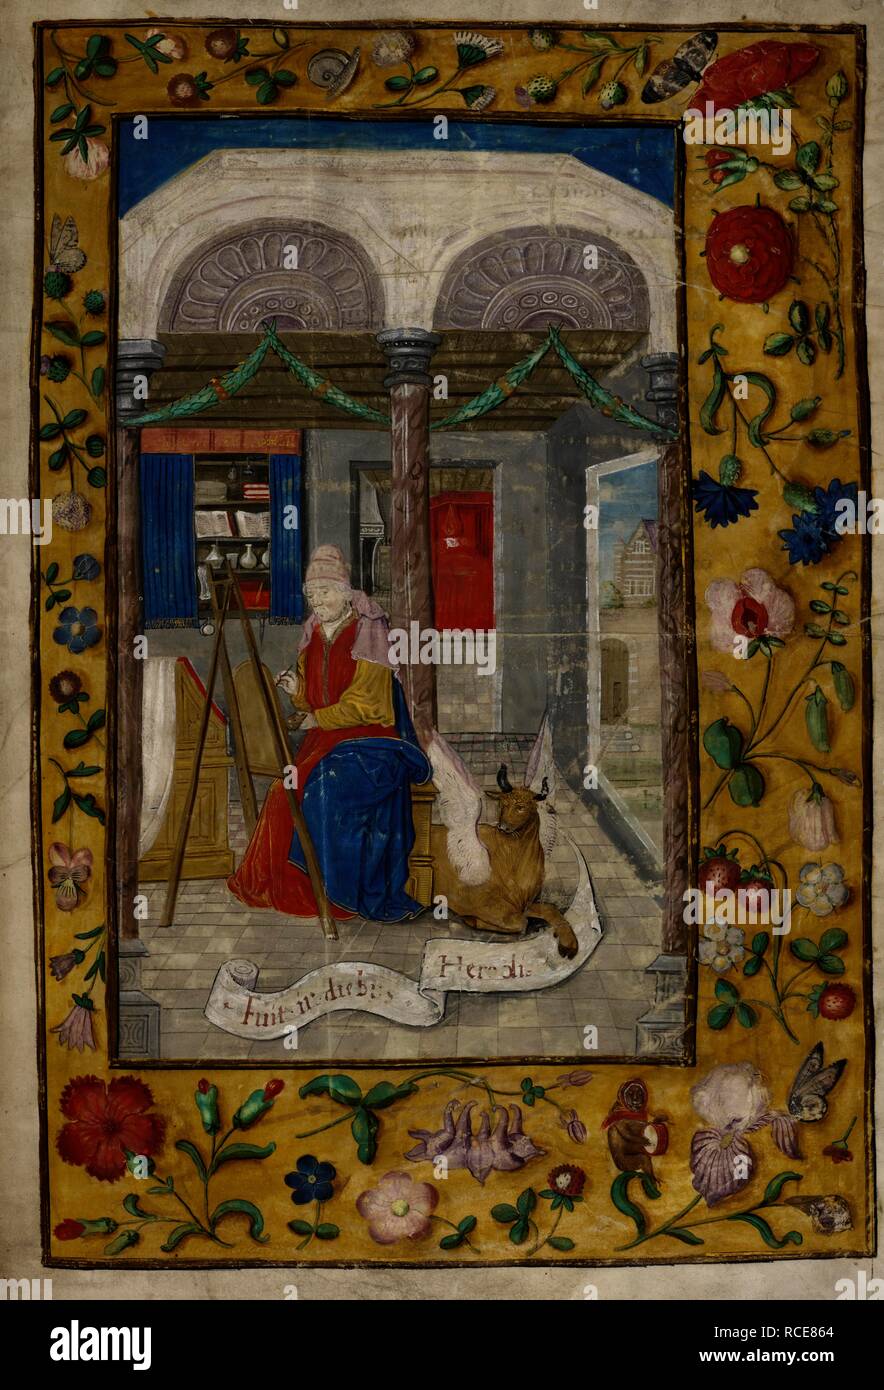 St Luke sitting at an easel, painting, accompanied by his Evangelist symbol, the calf; with strewn borders (full). Gospels of St Luke and St John, and Epistles. S. Netherlands; 1509. Source: Royal 1 E. V, volume 1, f.3. Language: Latin. Author: PETER MEGHEN. Stock Photo